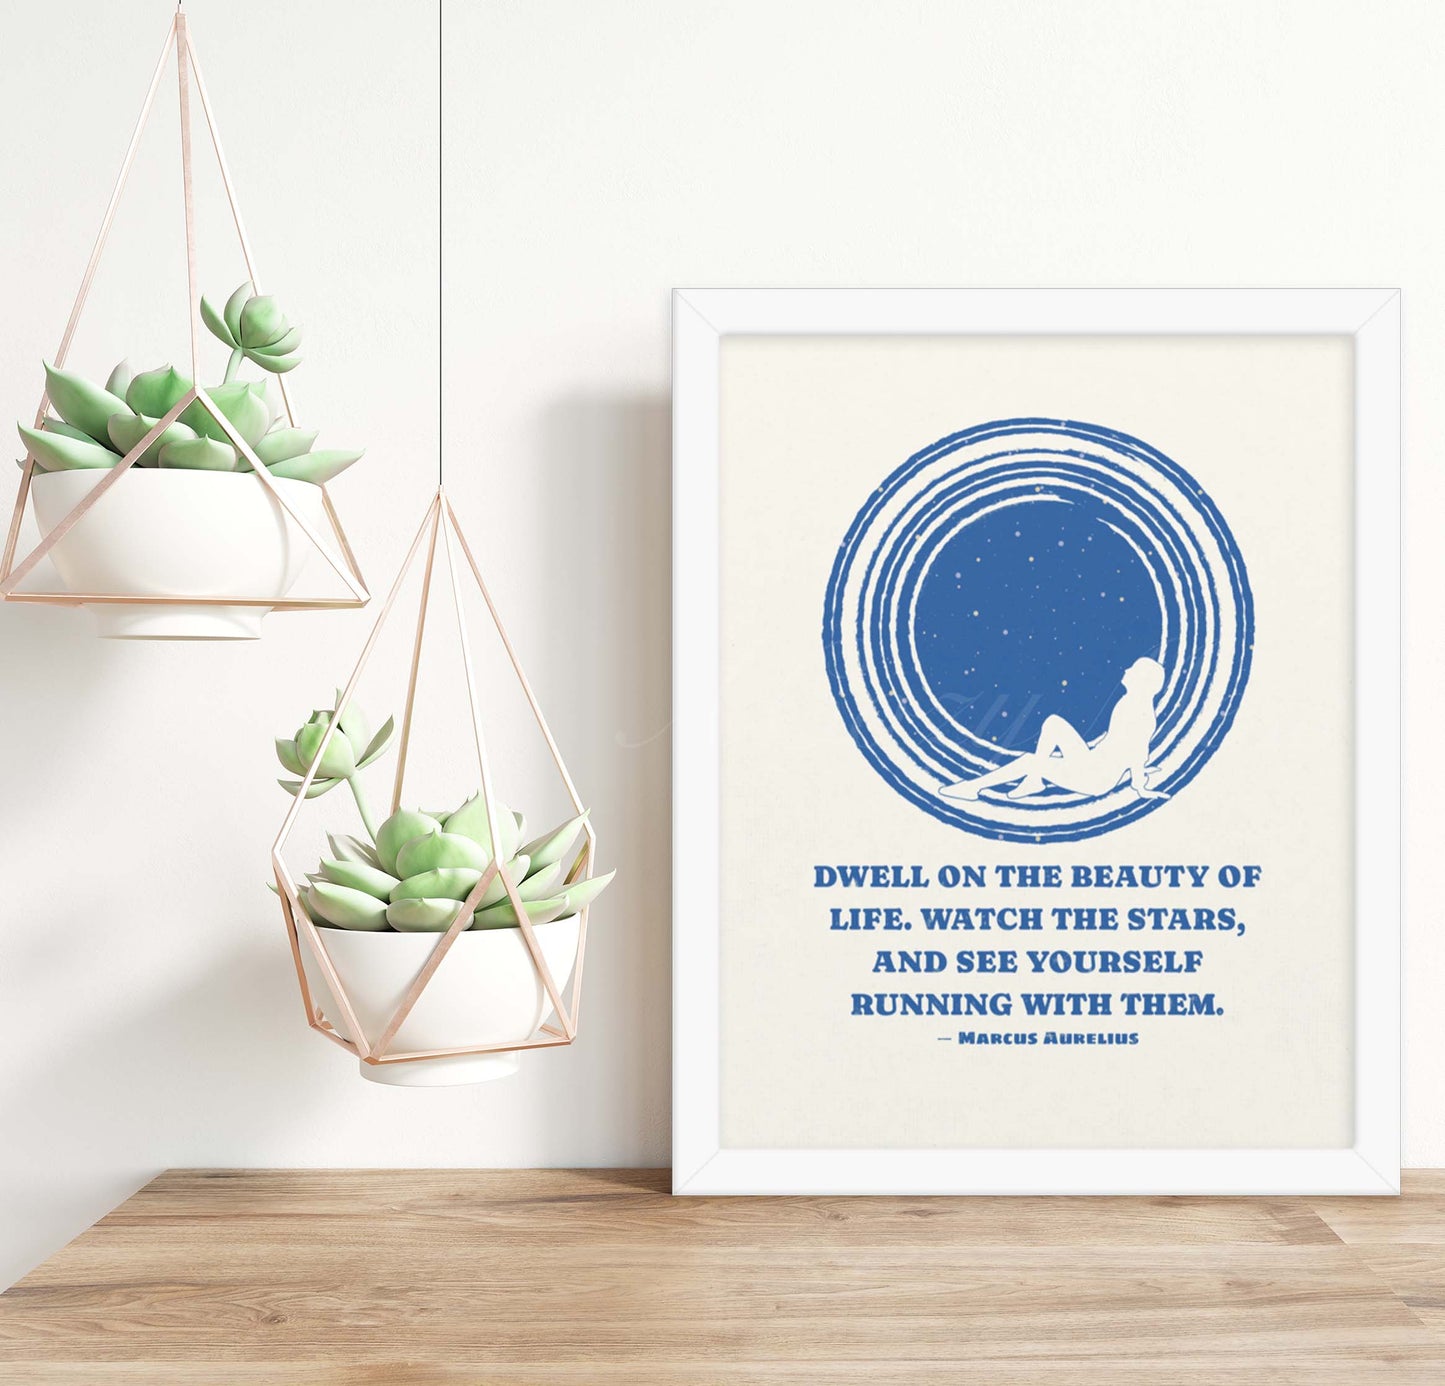 Dwell on the beauty of life. Watch the stars, and see yourself running with them.” by marcus aurelius stoic quote with an illustration of a person looking at sky blue on white in white frame.